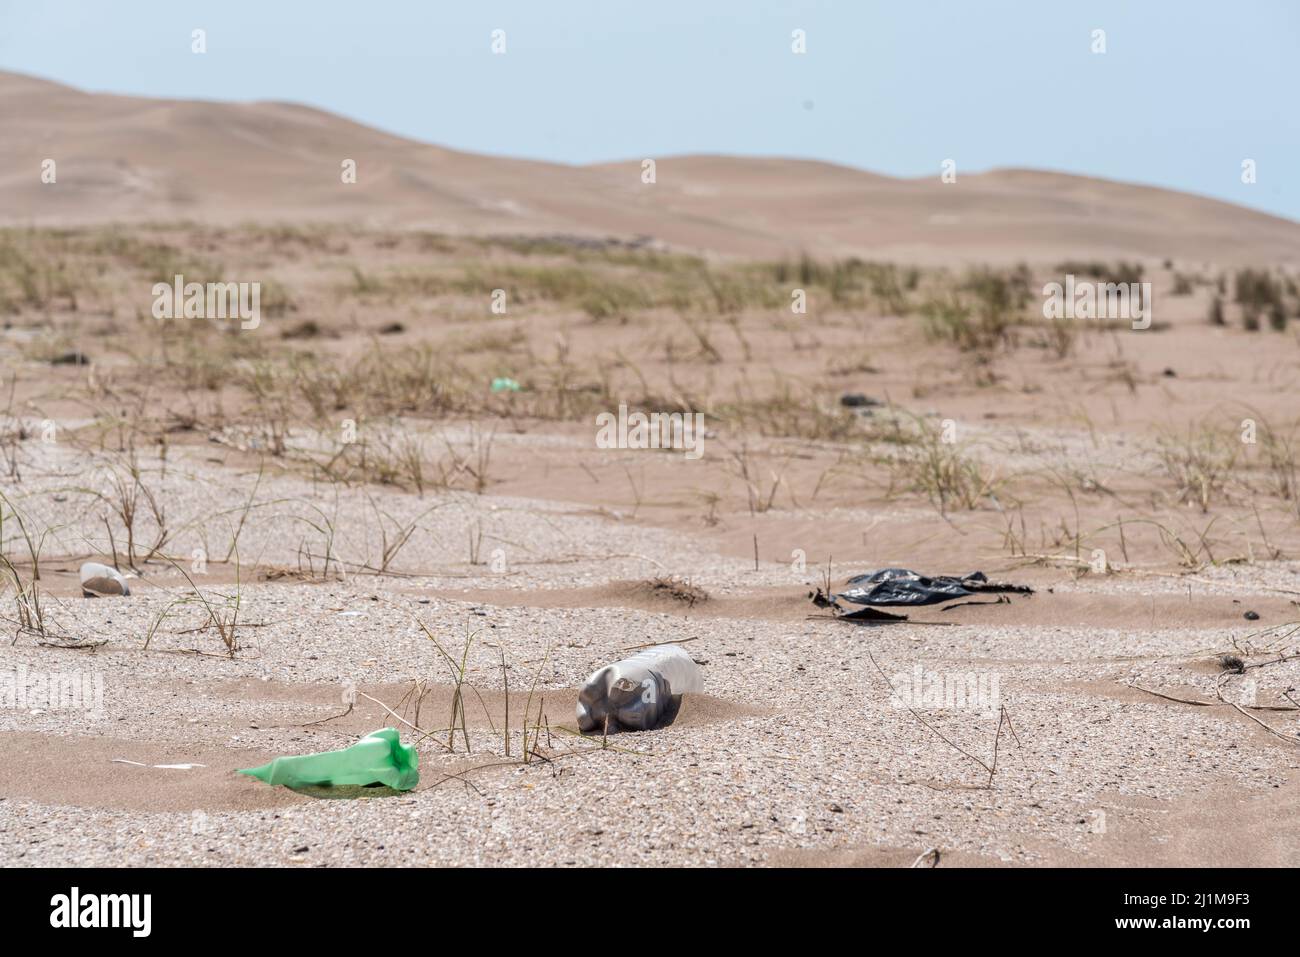 Plastic bottles lying on the sand near the beach with dunes in the background. Concept take care of the earth. Stock Photo